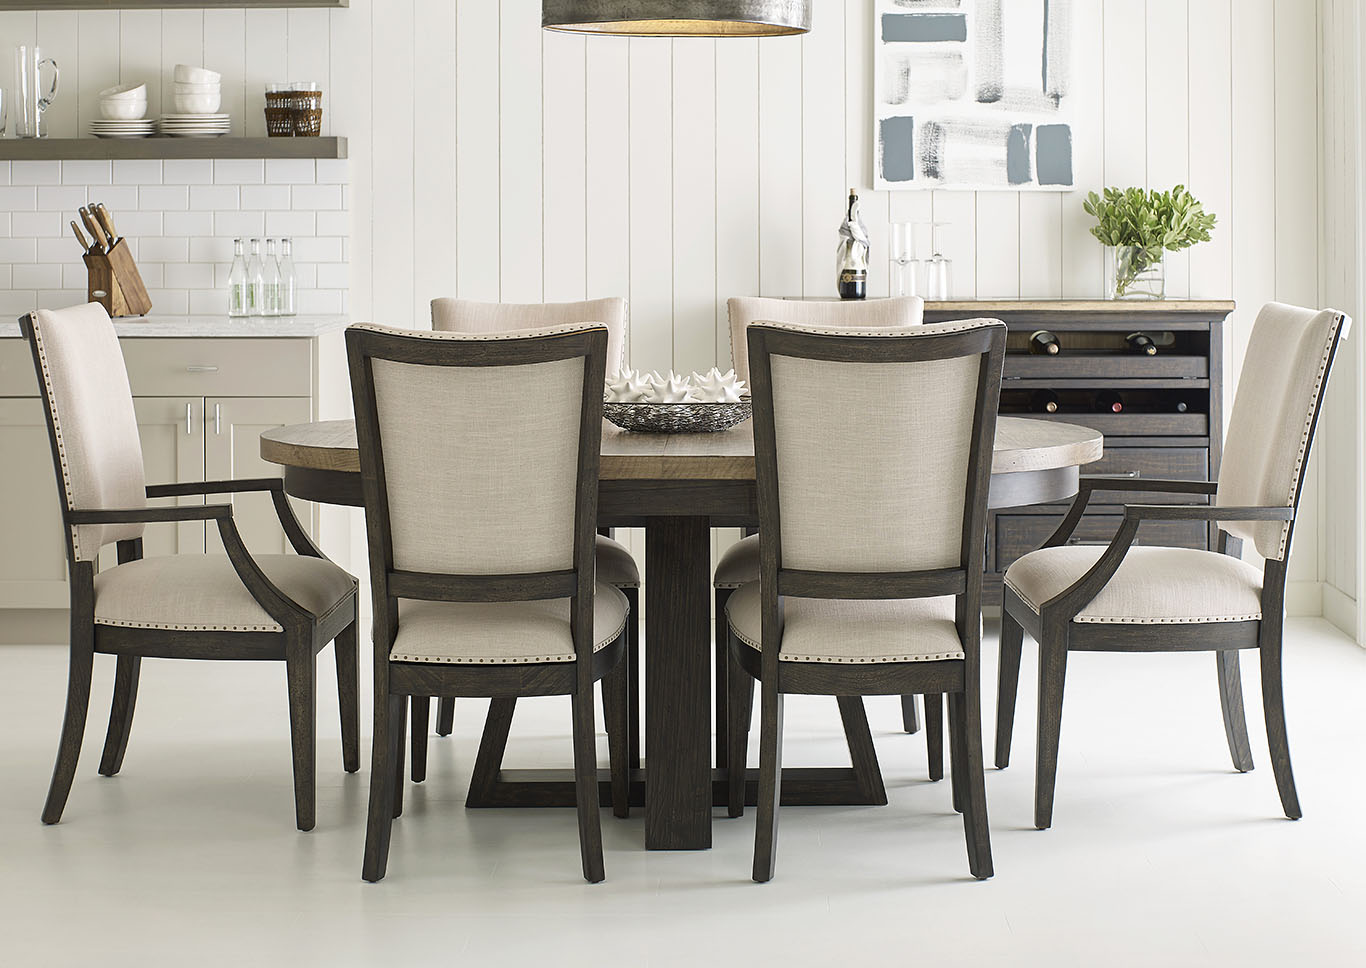 Plank Road Charcoal Oval Dining Set w/4 Side Chairs & 2 Arm Chairs,Kincaid